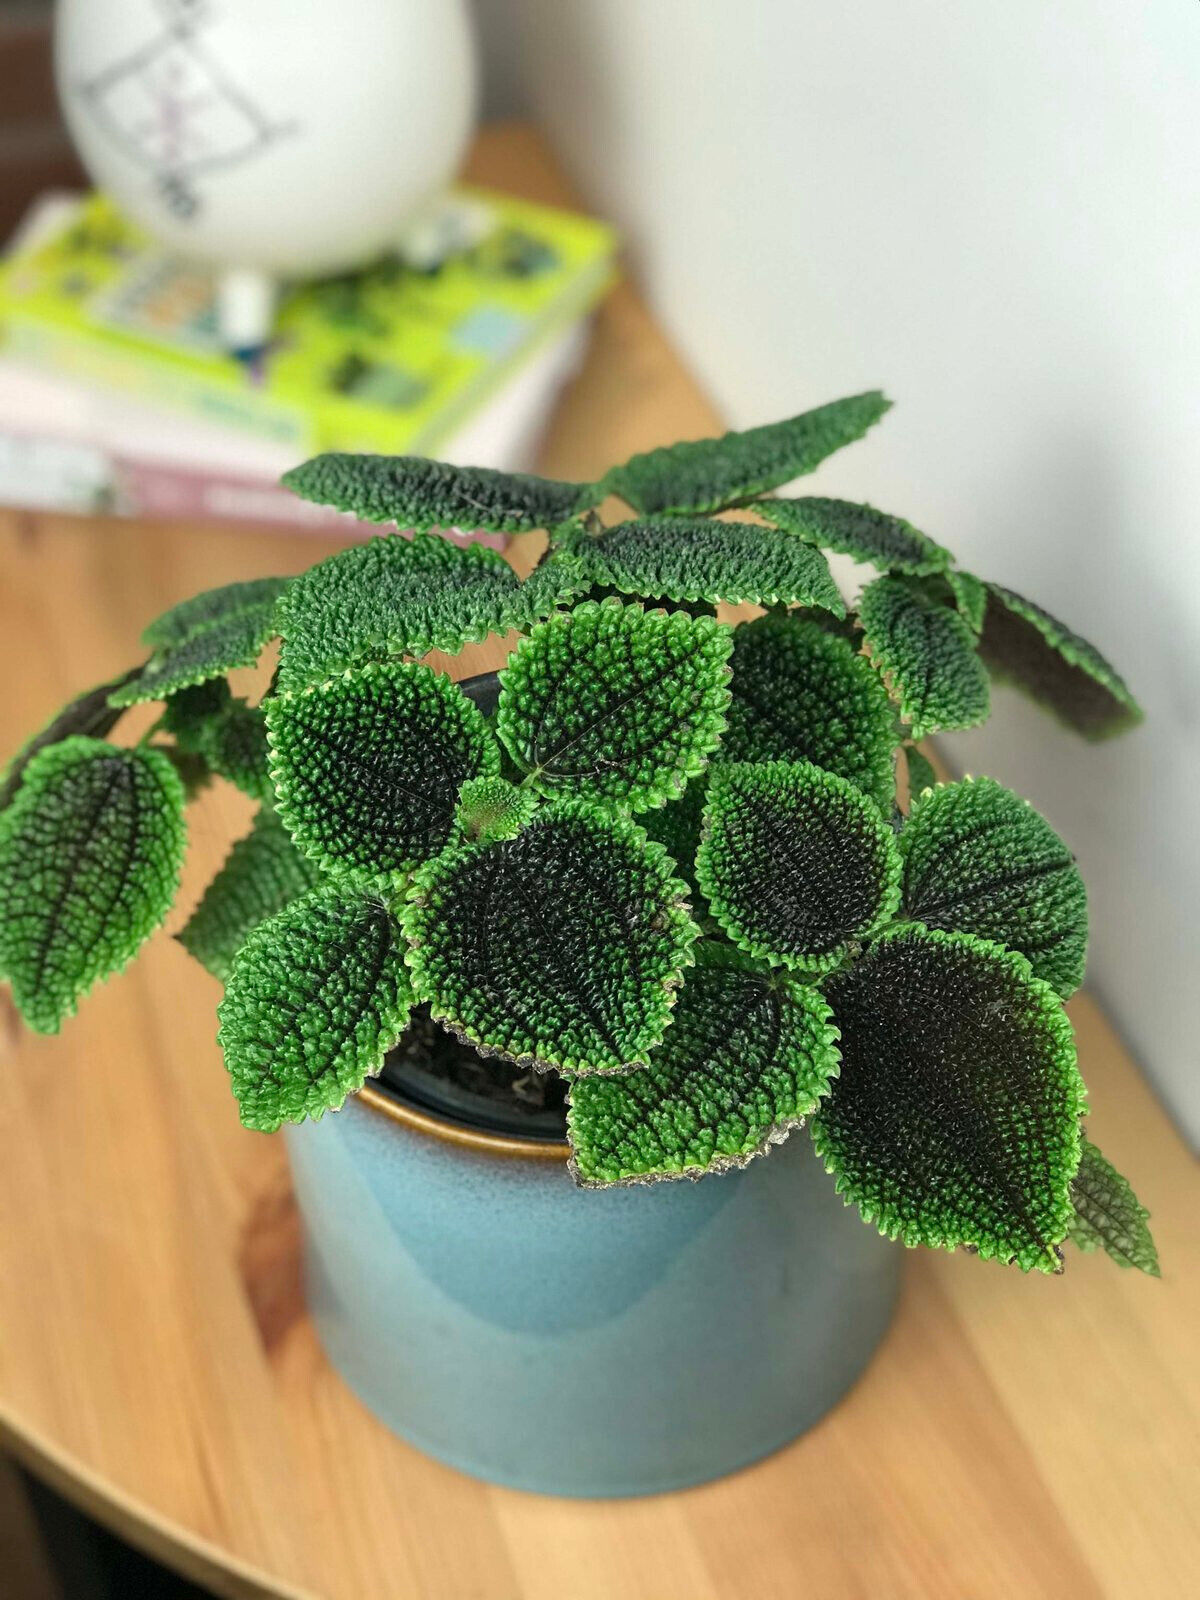 Pilea involucrata 'Moon Valley' Tropical Indoor Air Purifying Plant in 6cm pot